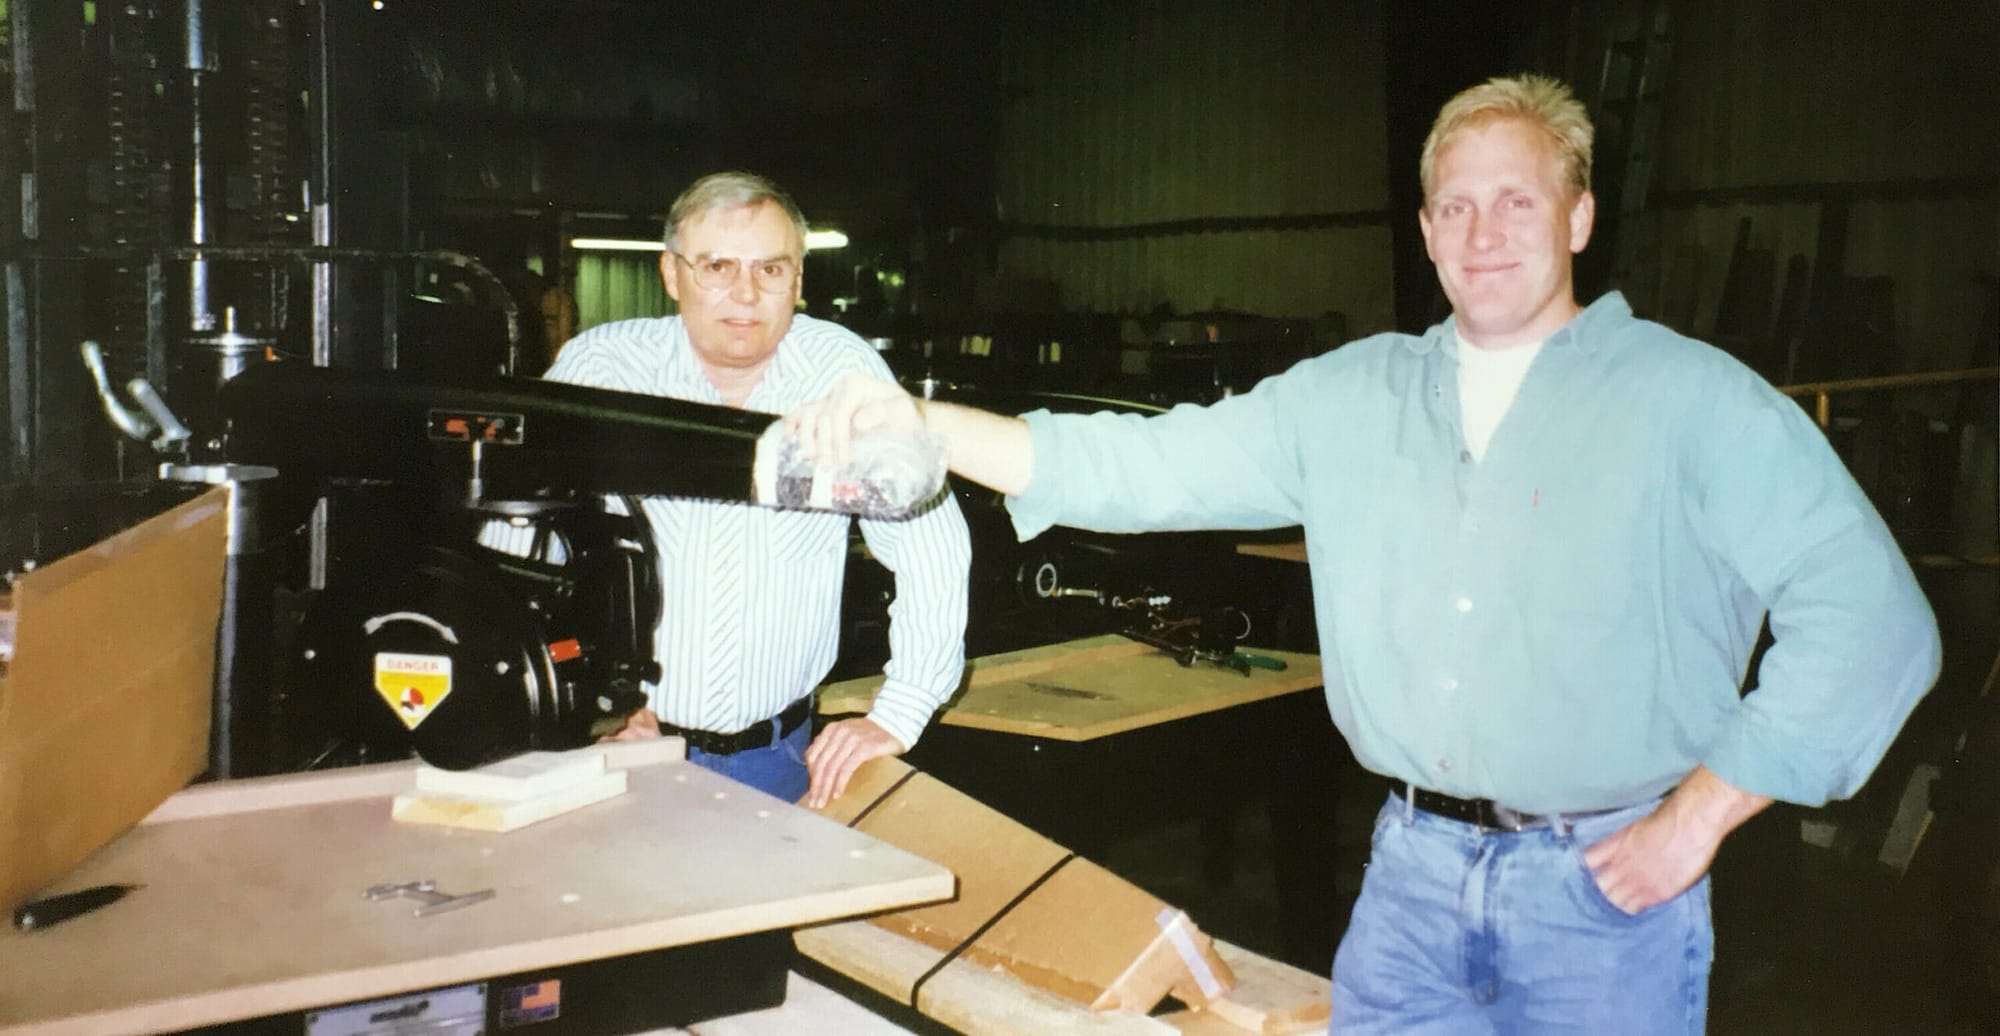 Robert and Allen show off the first 12" Contractor Duty Radial Arm Saw built at the Original Saw Company.